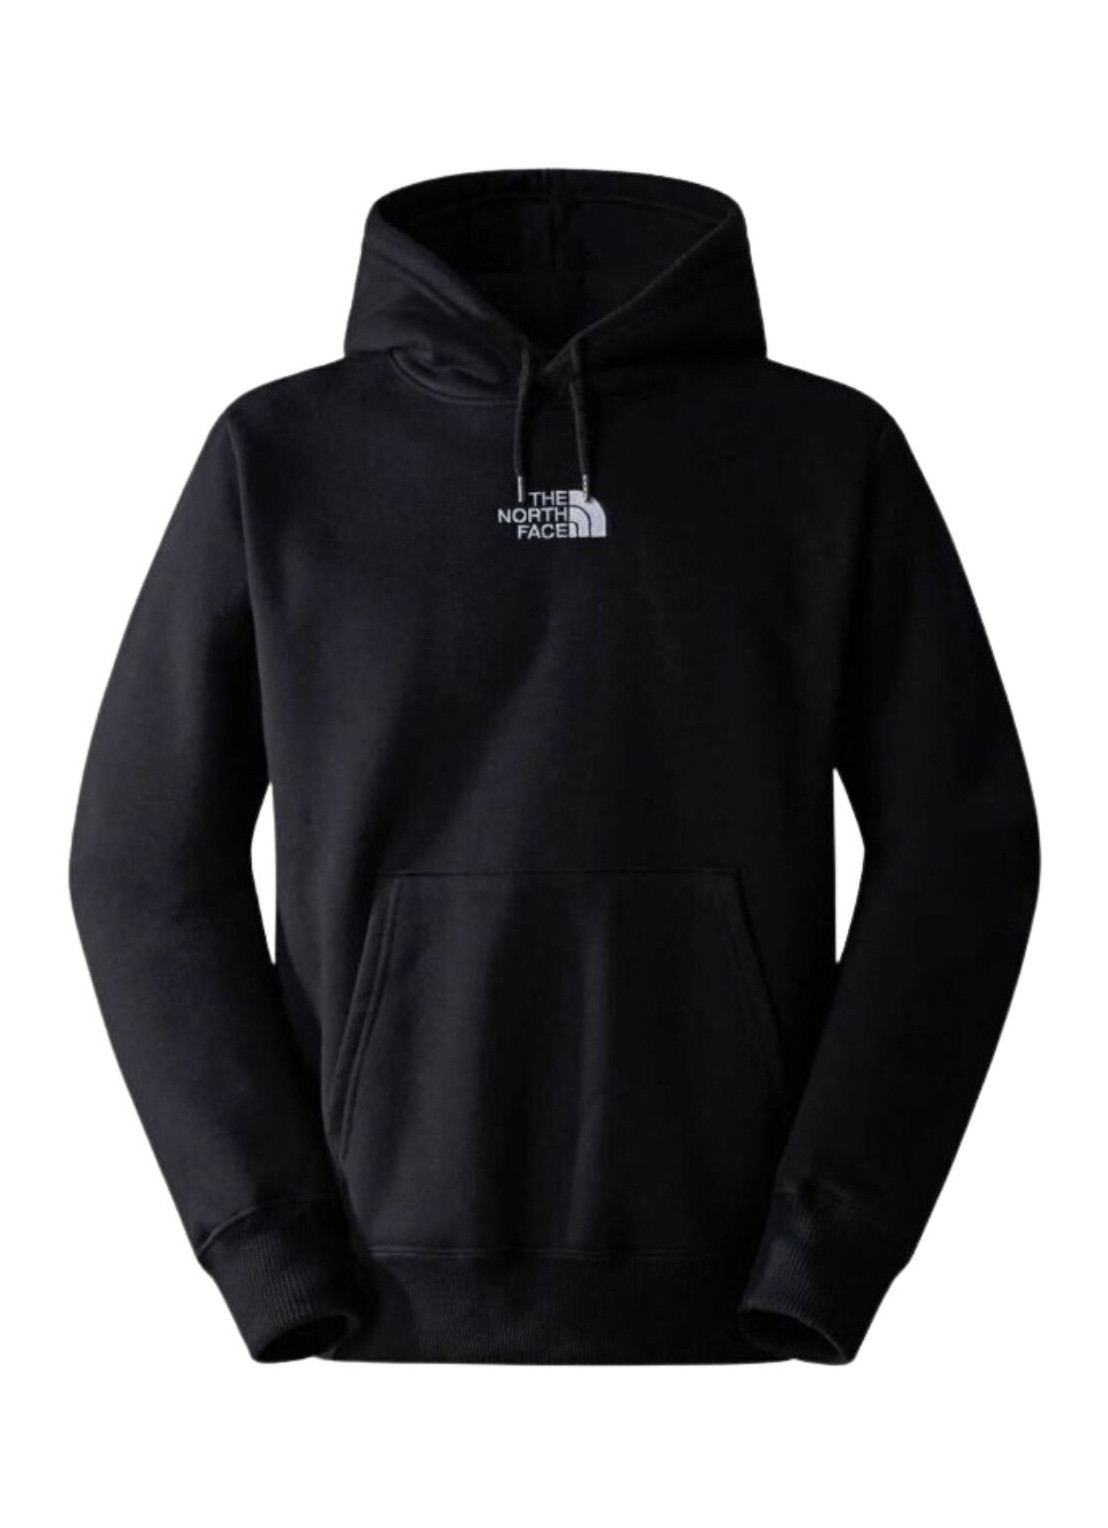 Sudadera the north face sweater man men's heavyweight hoodie nf0a84gkky41 ky41 talla negro
 